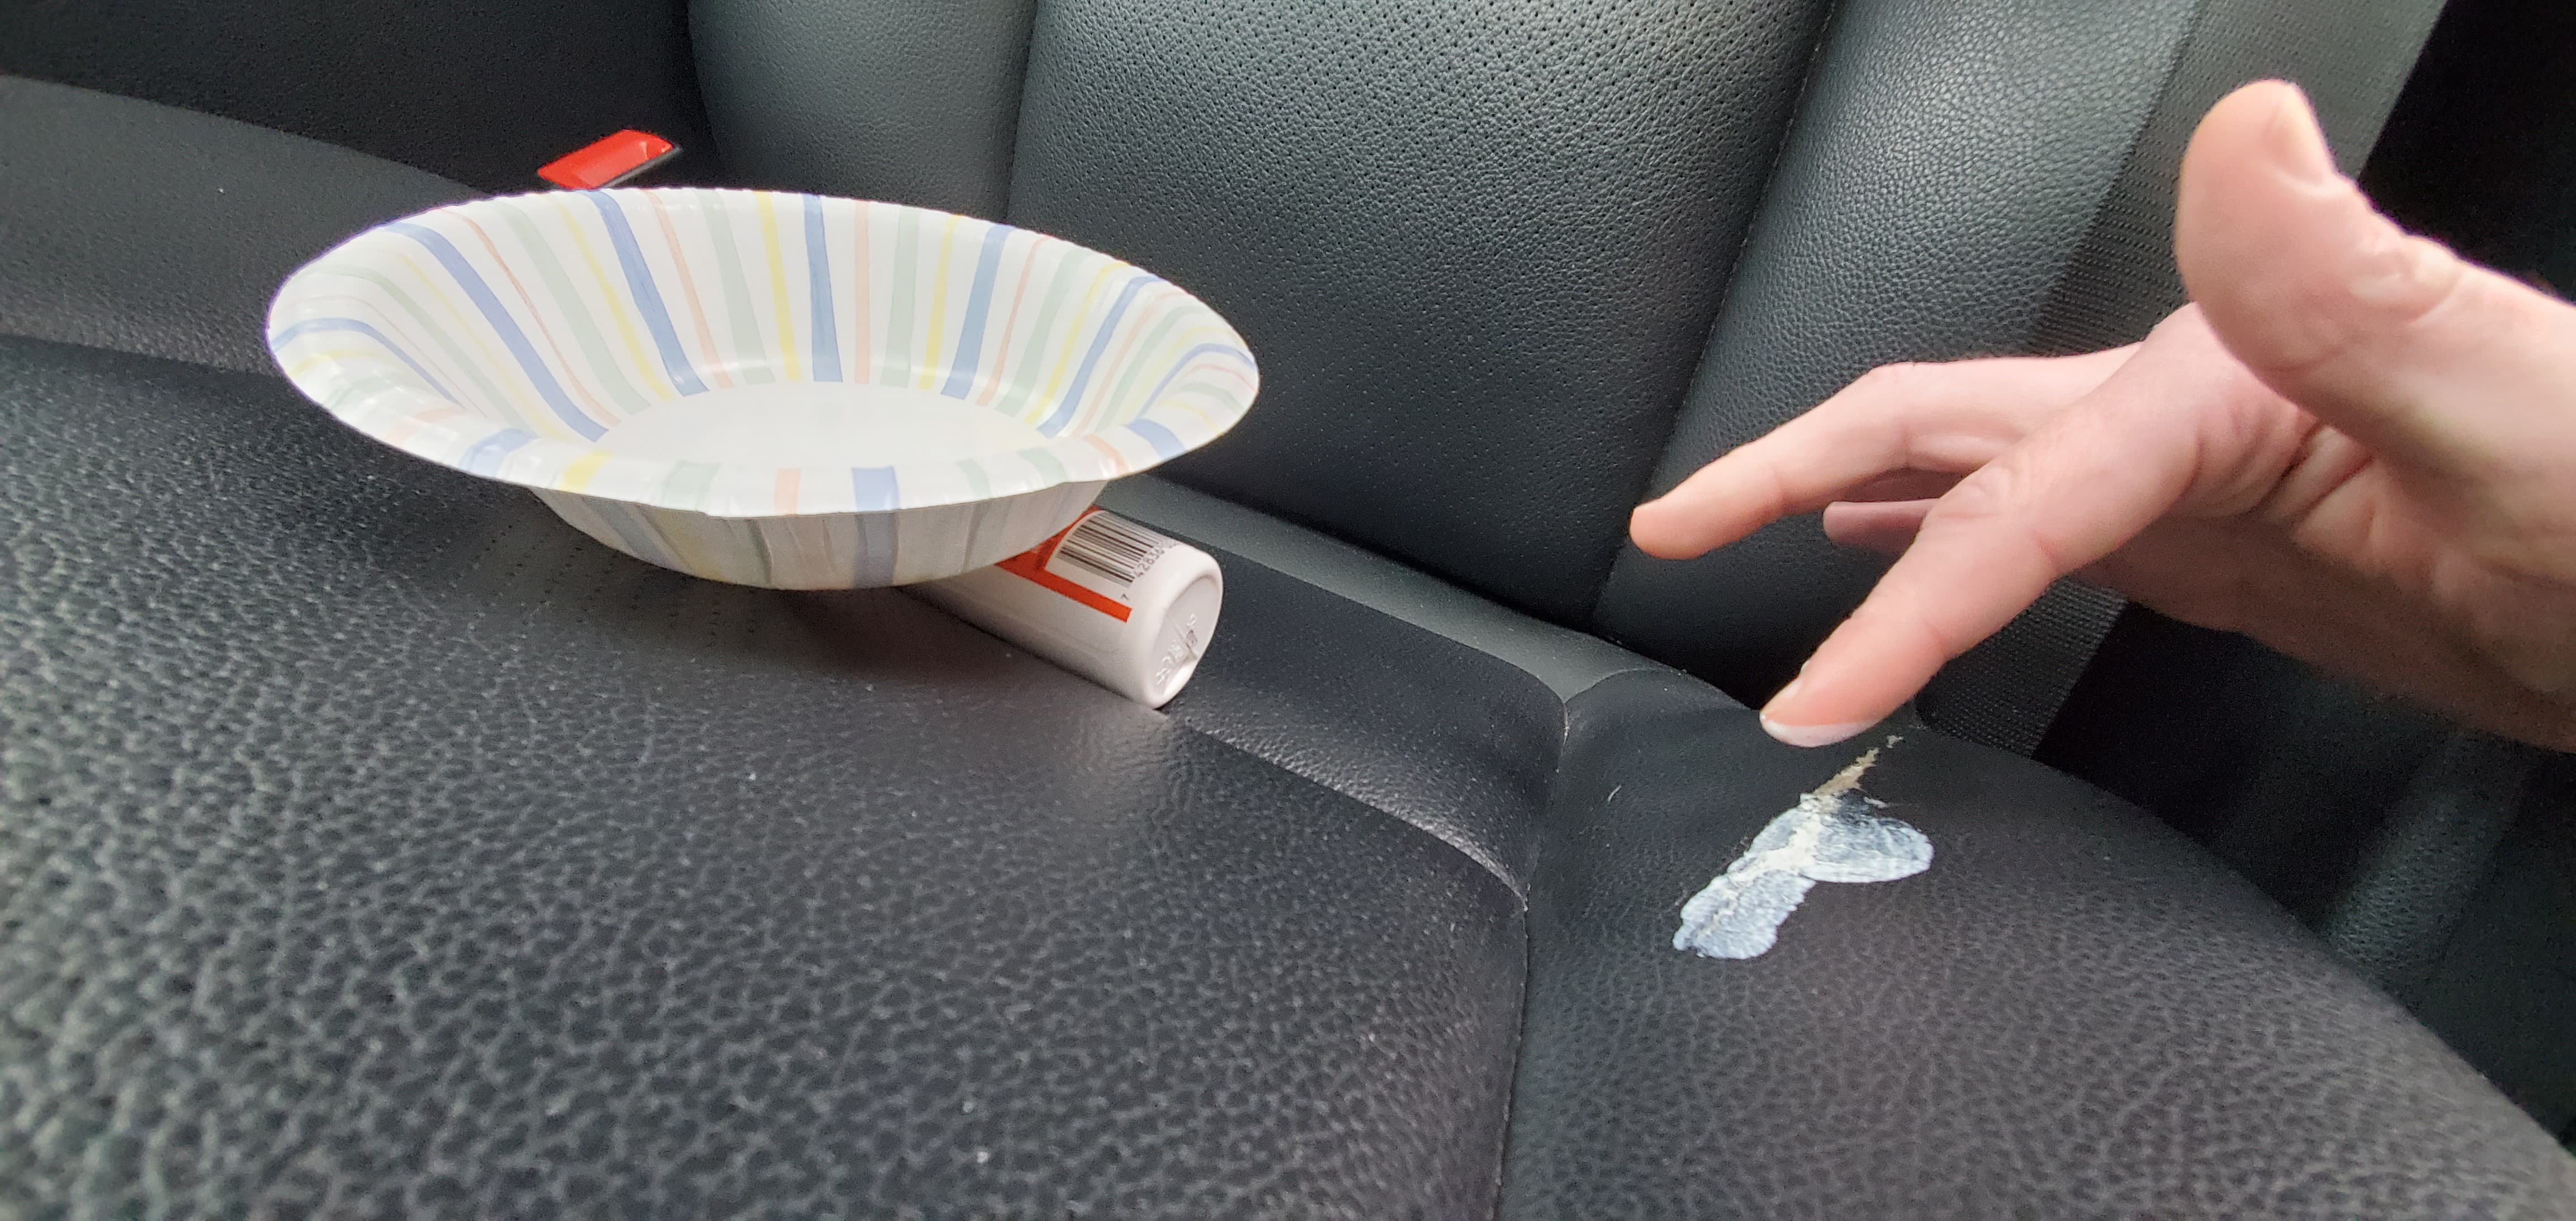 How To Repair A Leather Car Seat - How To Repair Small Tear In Vinyl Car Seat